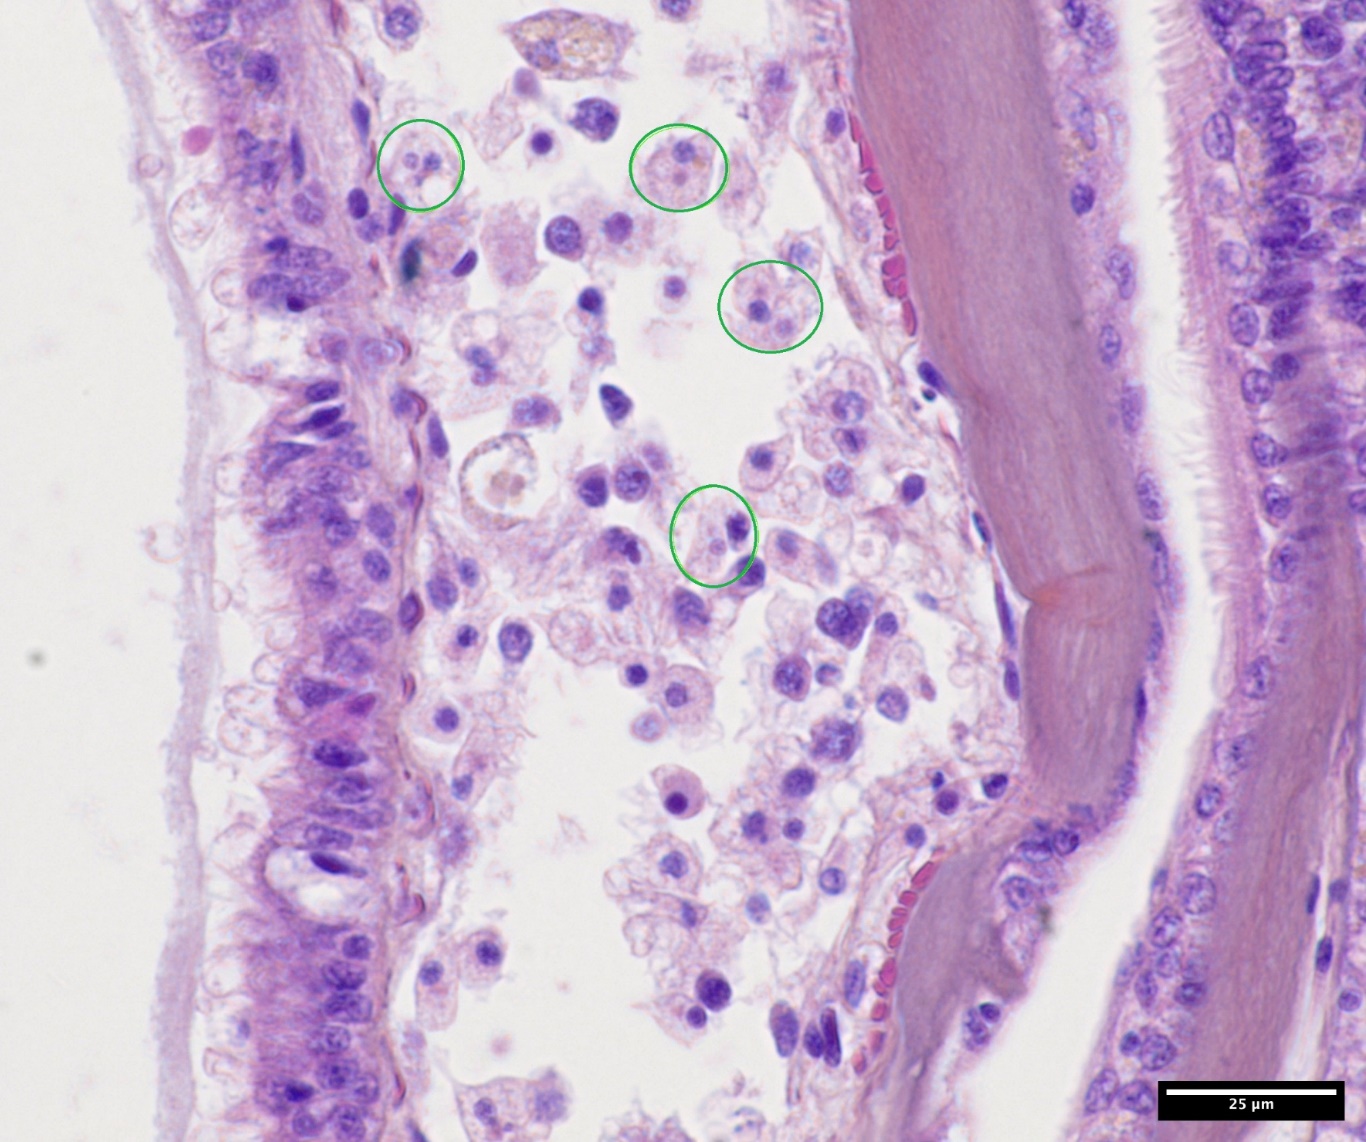 Image from microscopical examination of oyster tissue with haemocytes with microcells